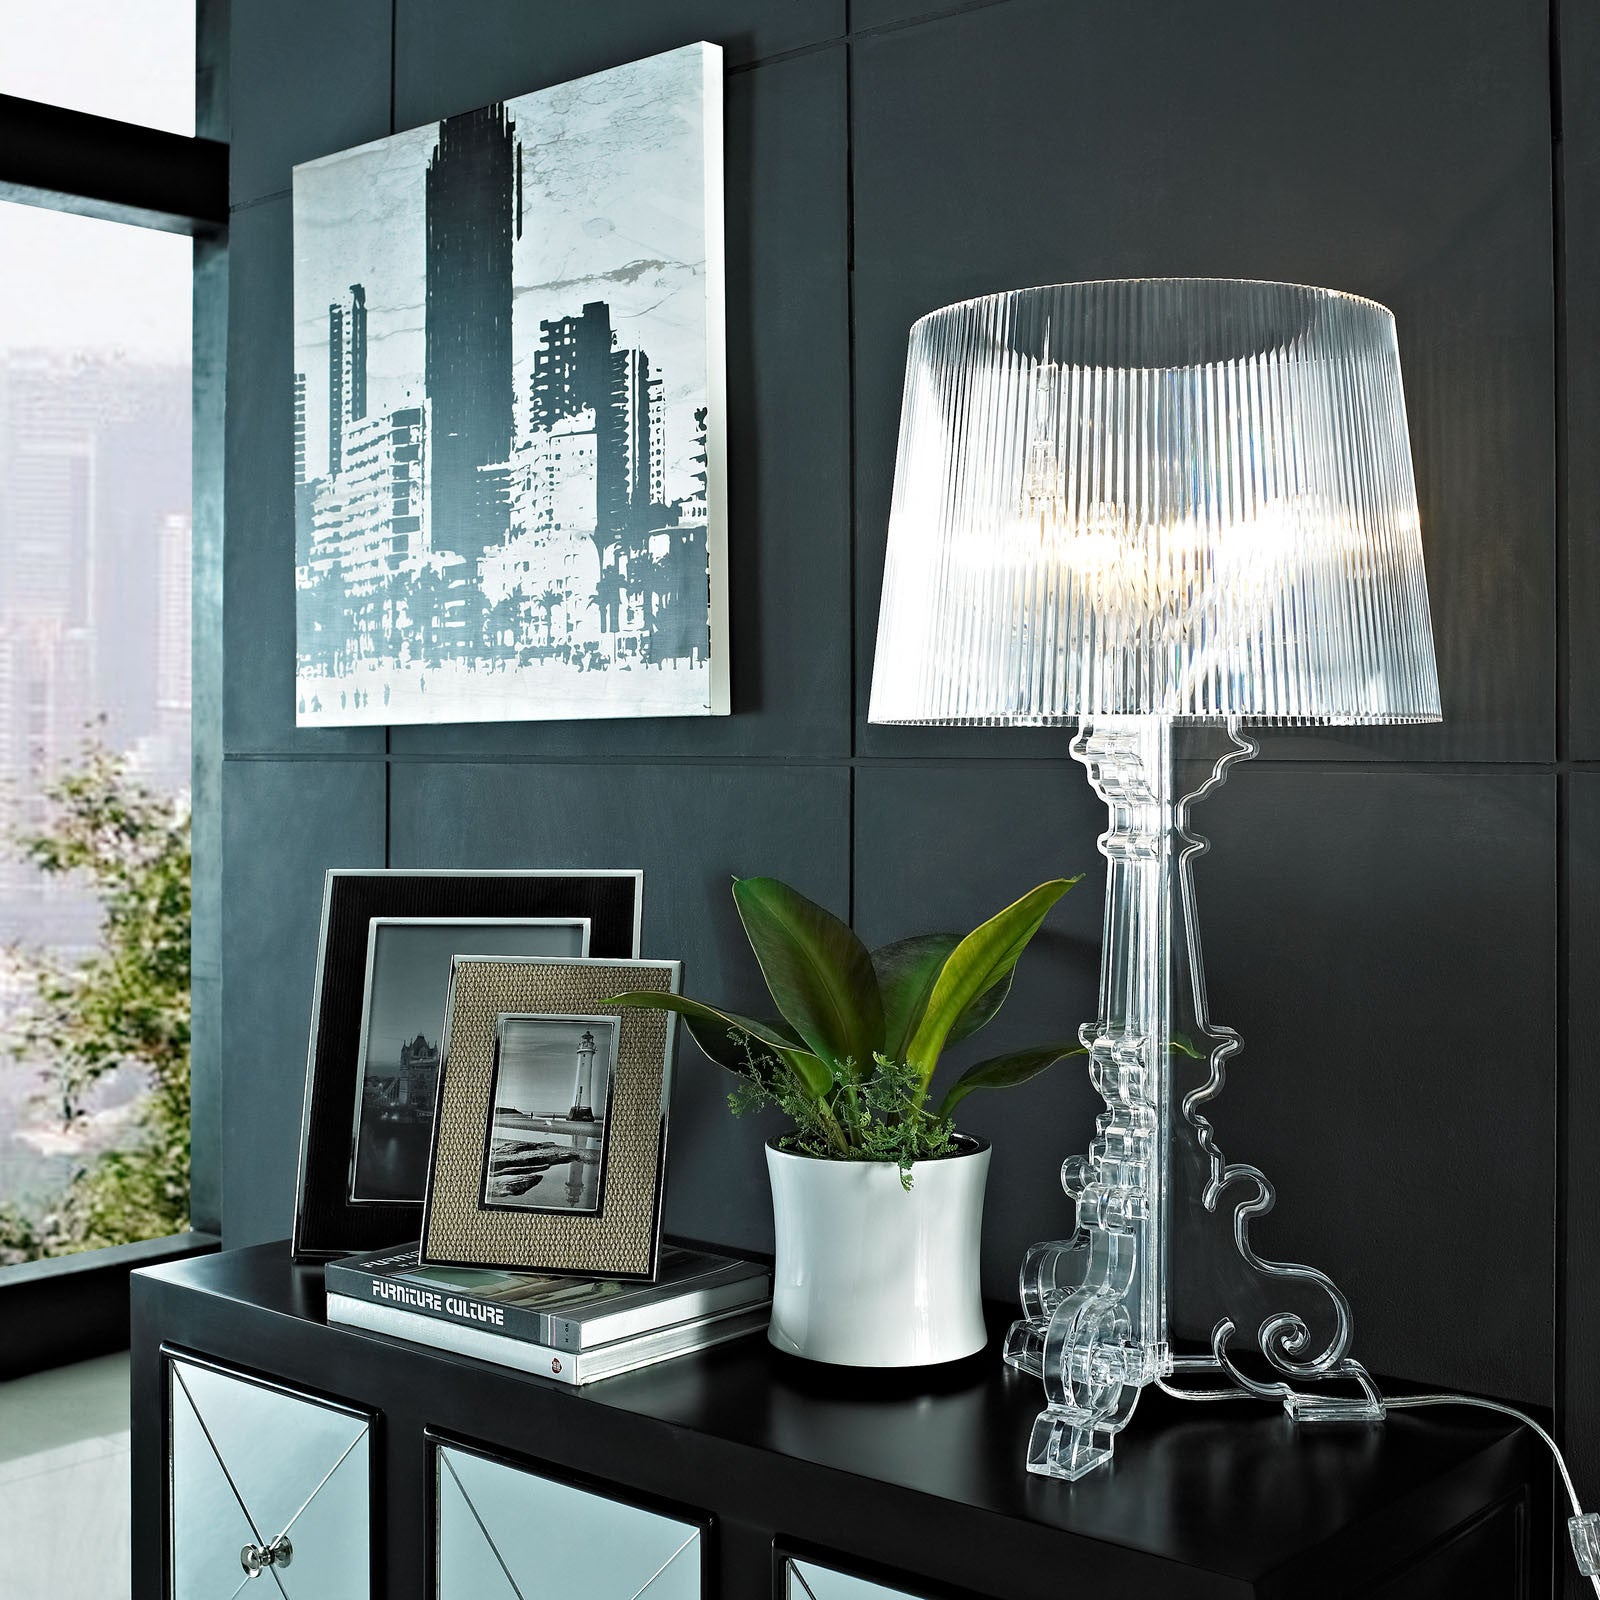 Franc Grand Table Lamp Clear